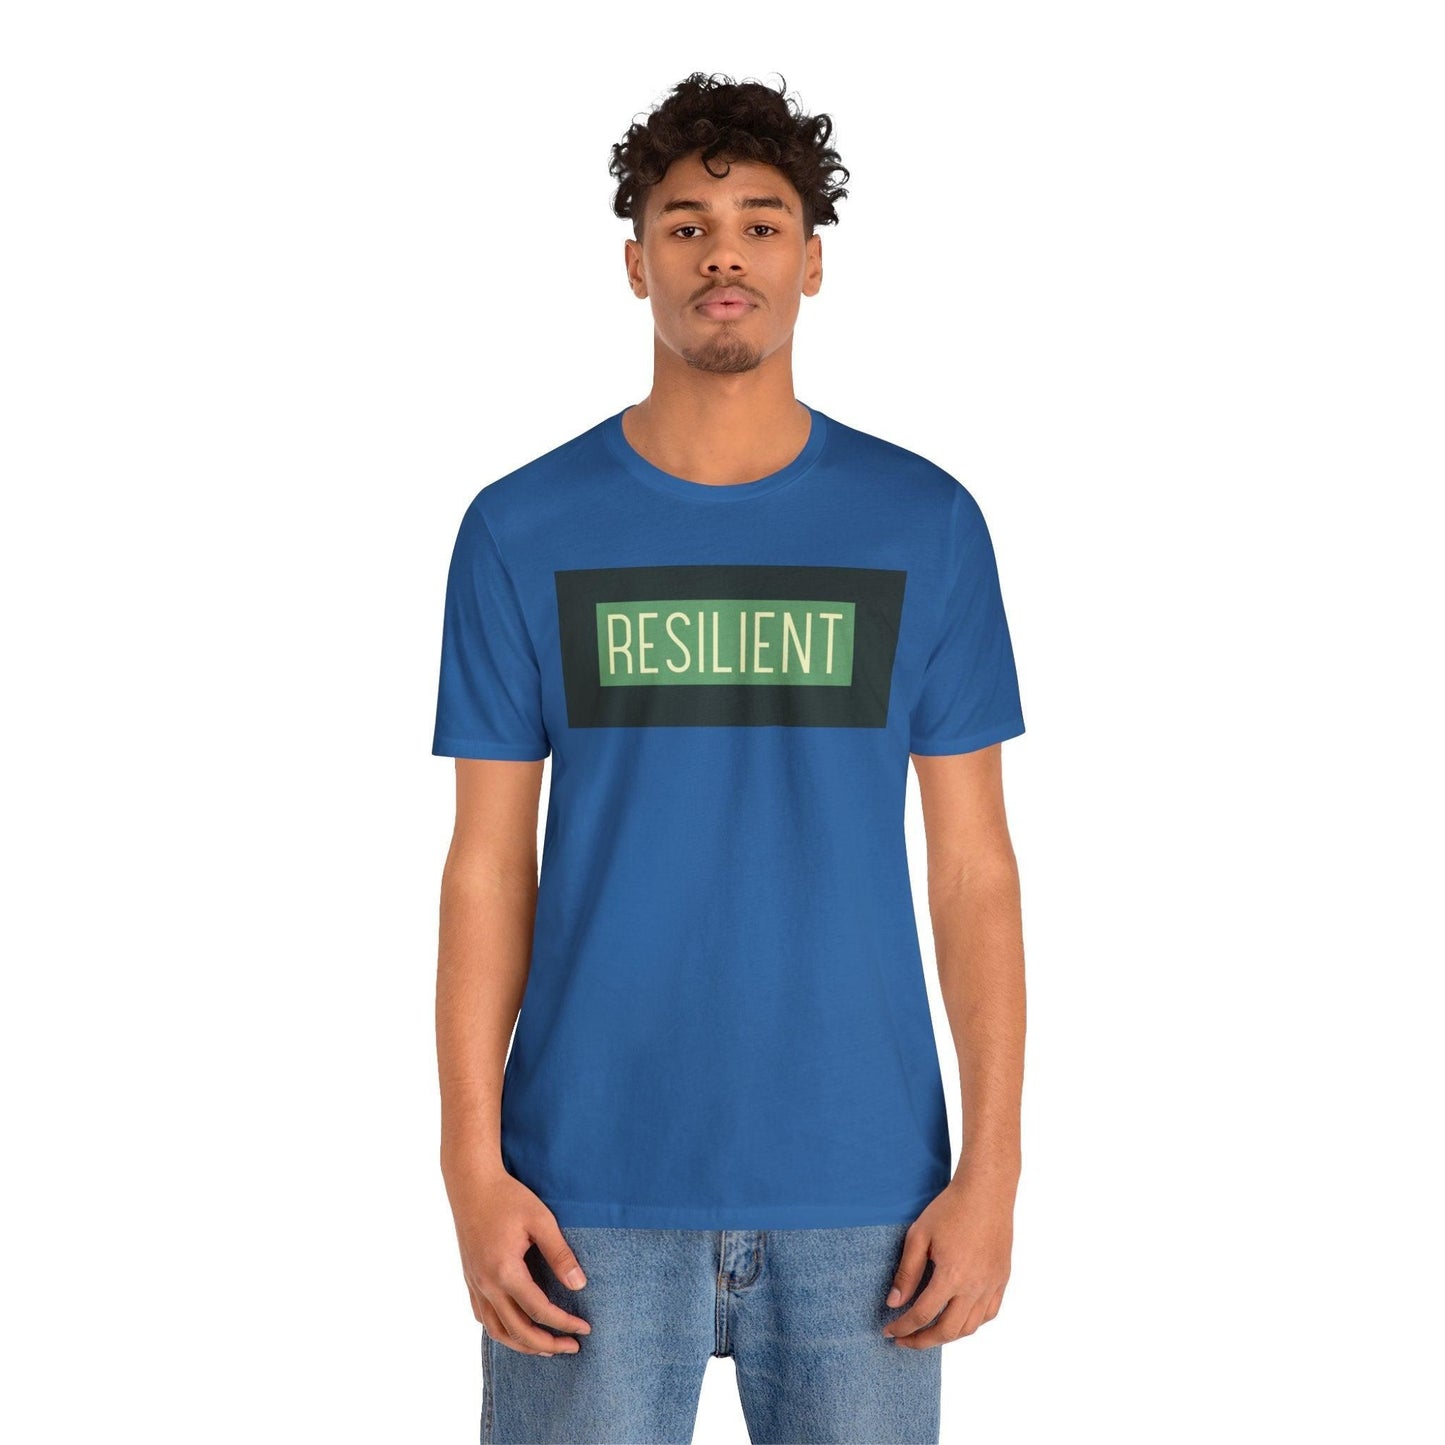 Resilient Unisex Tee T-Shirt Columbia Blue XS 